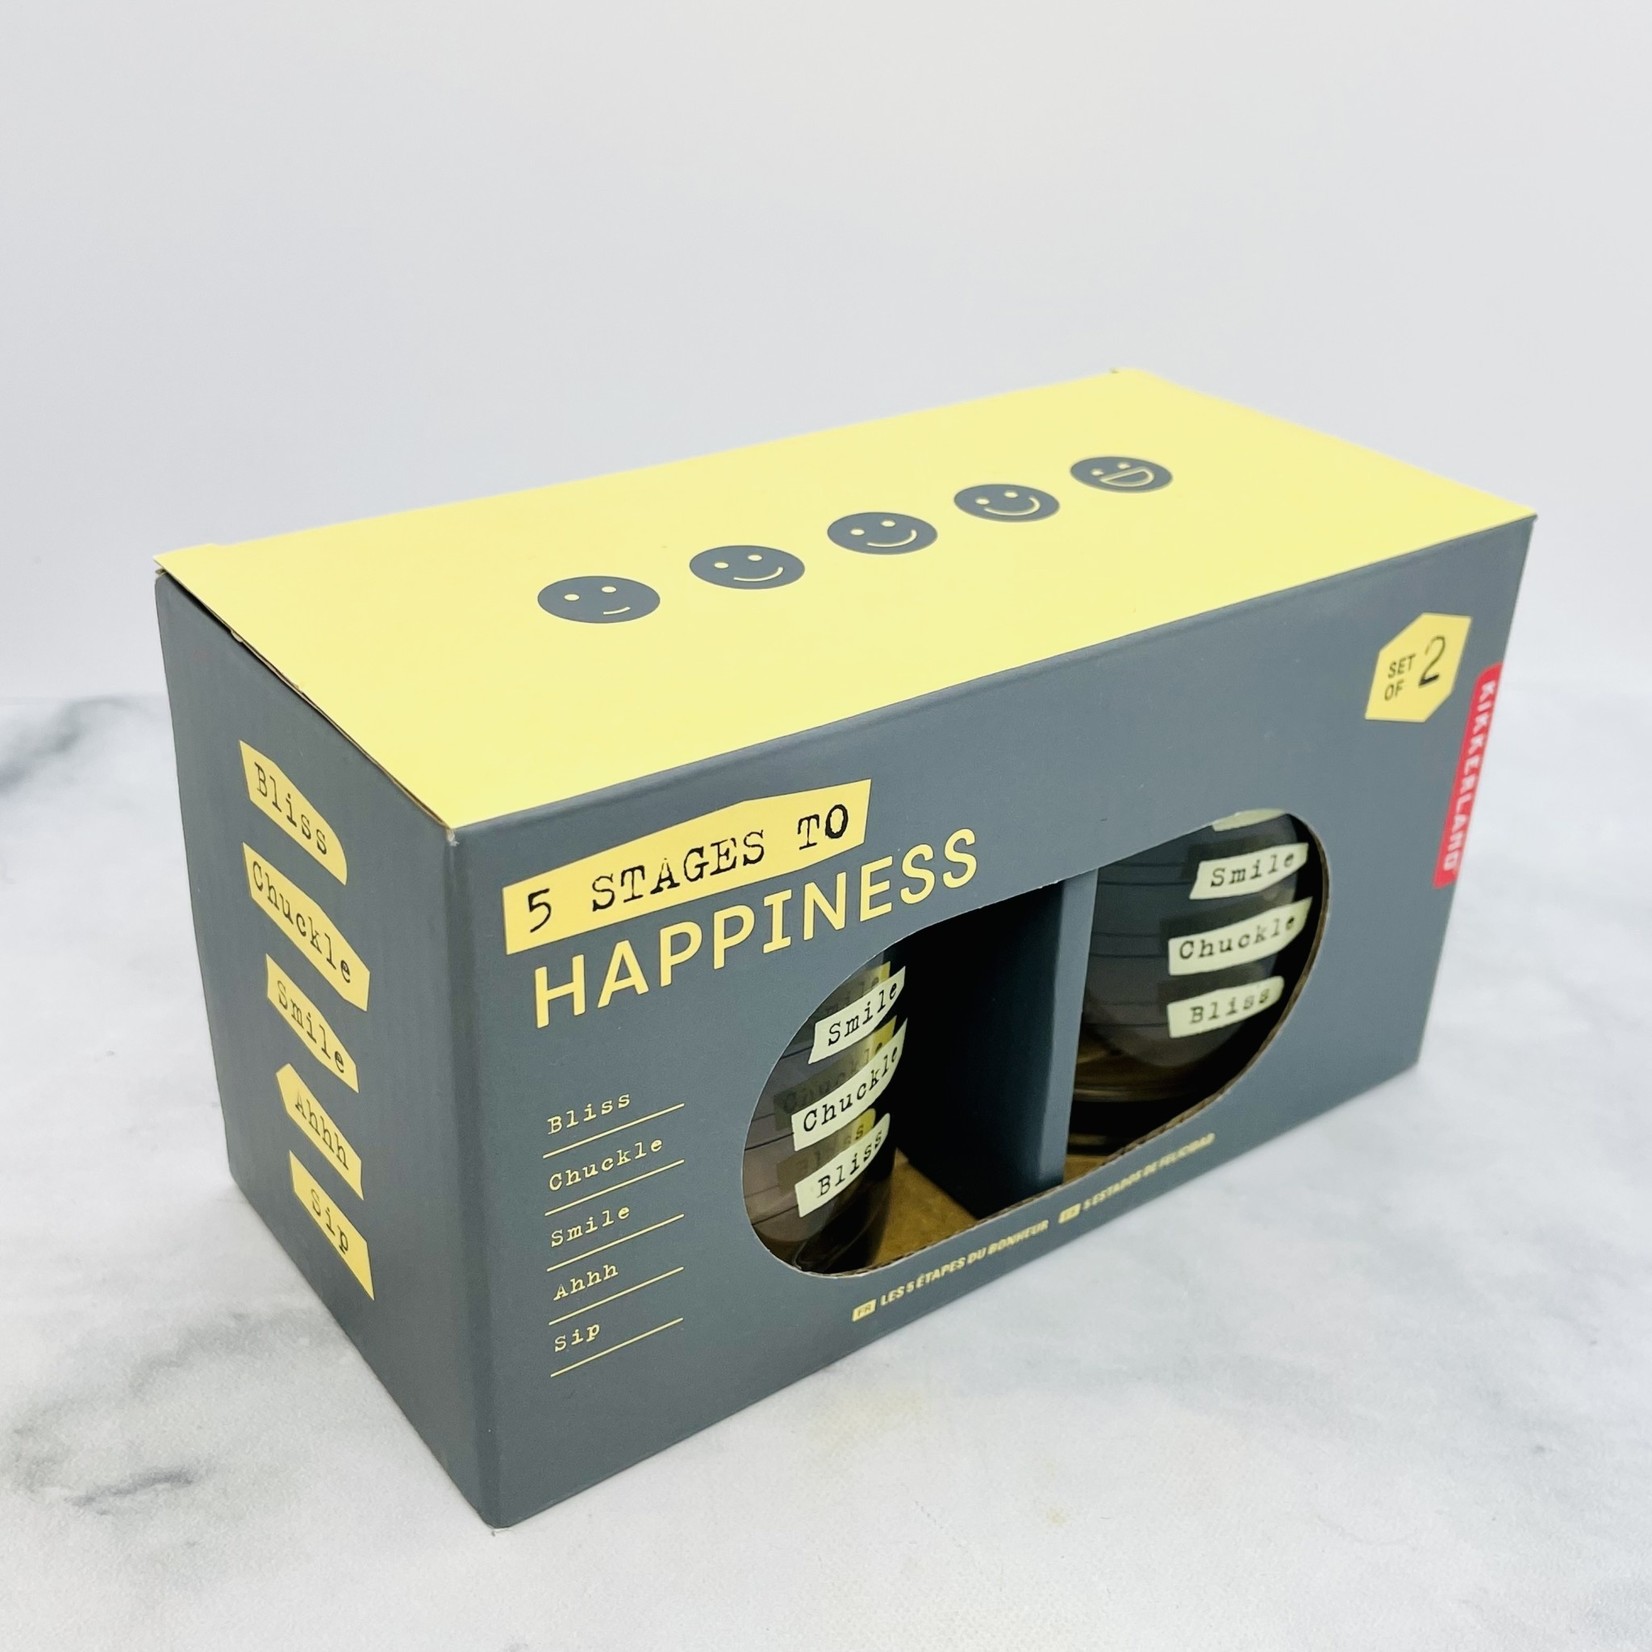 Five Stages to Happiness Glasses